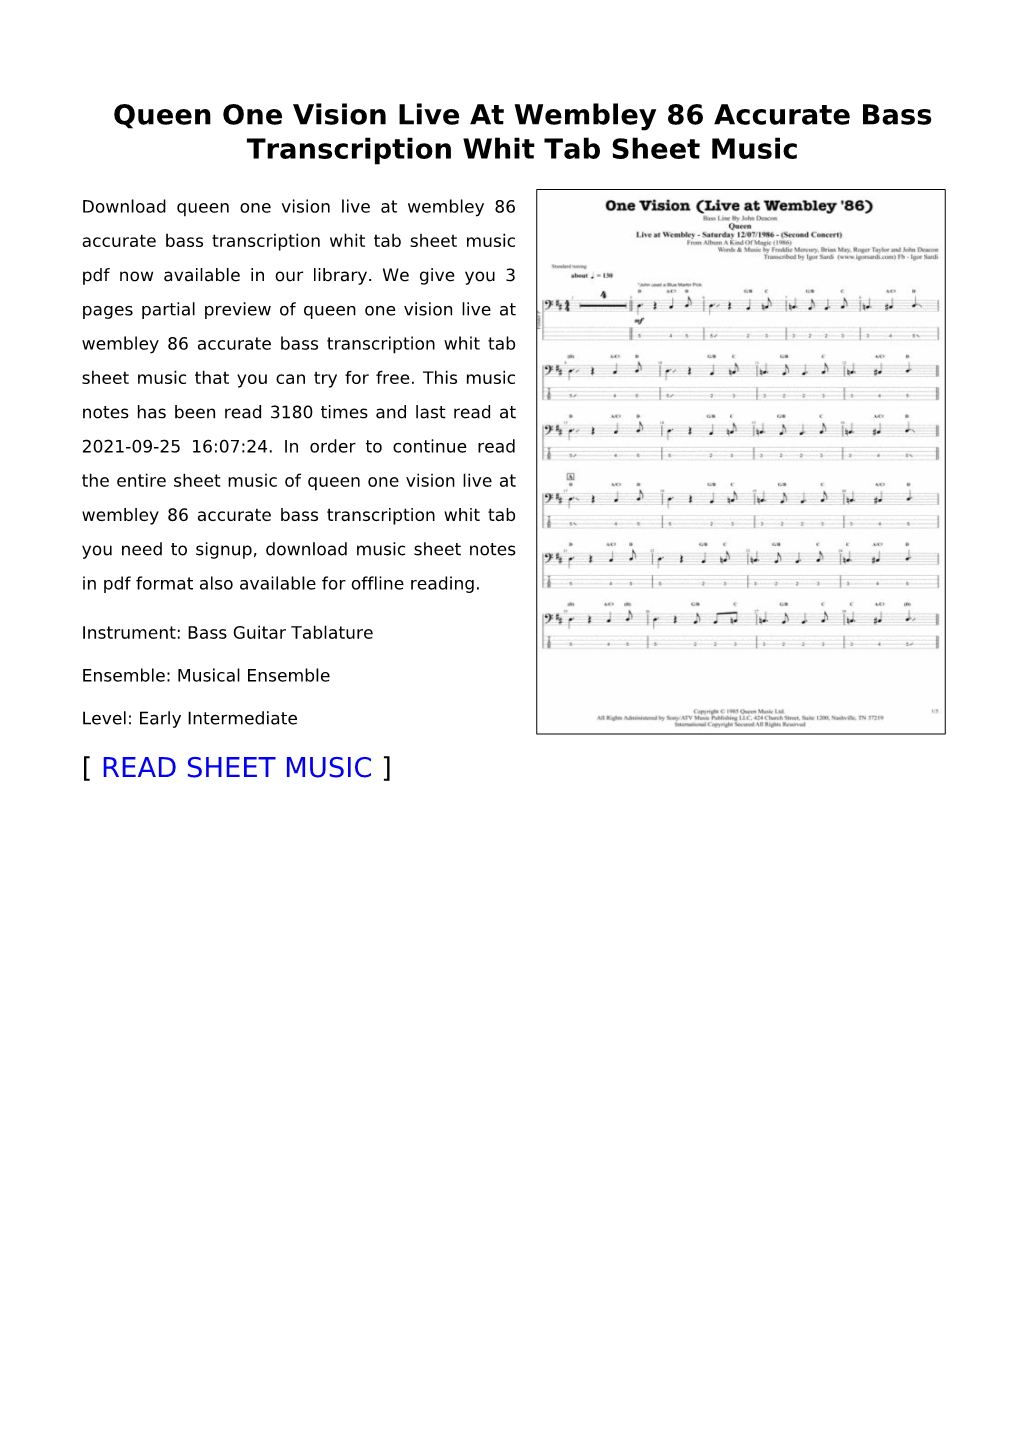 Queen One Vision Live at Wembley 86 Accurate Bass Transcription Whit Tab Sheet Music